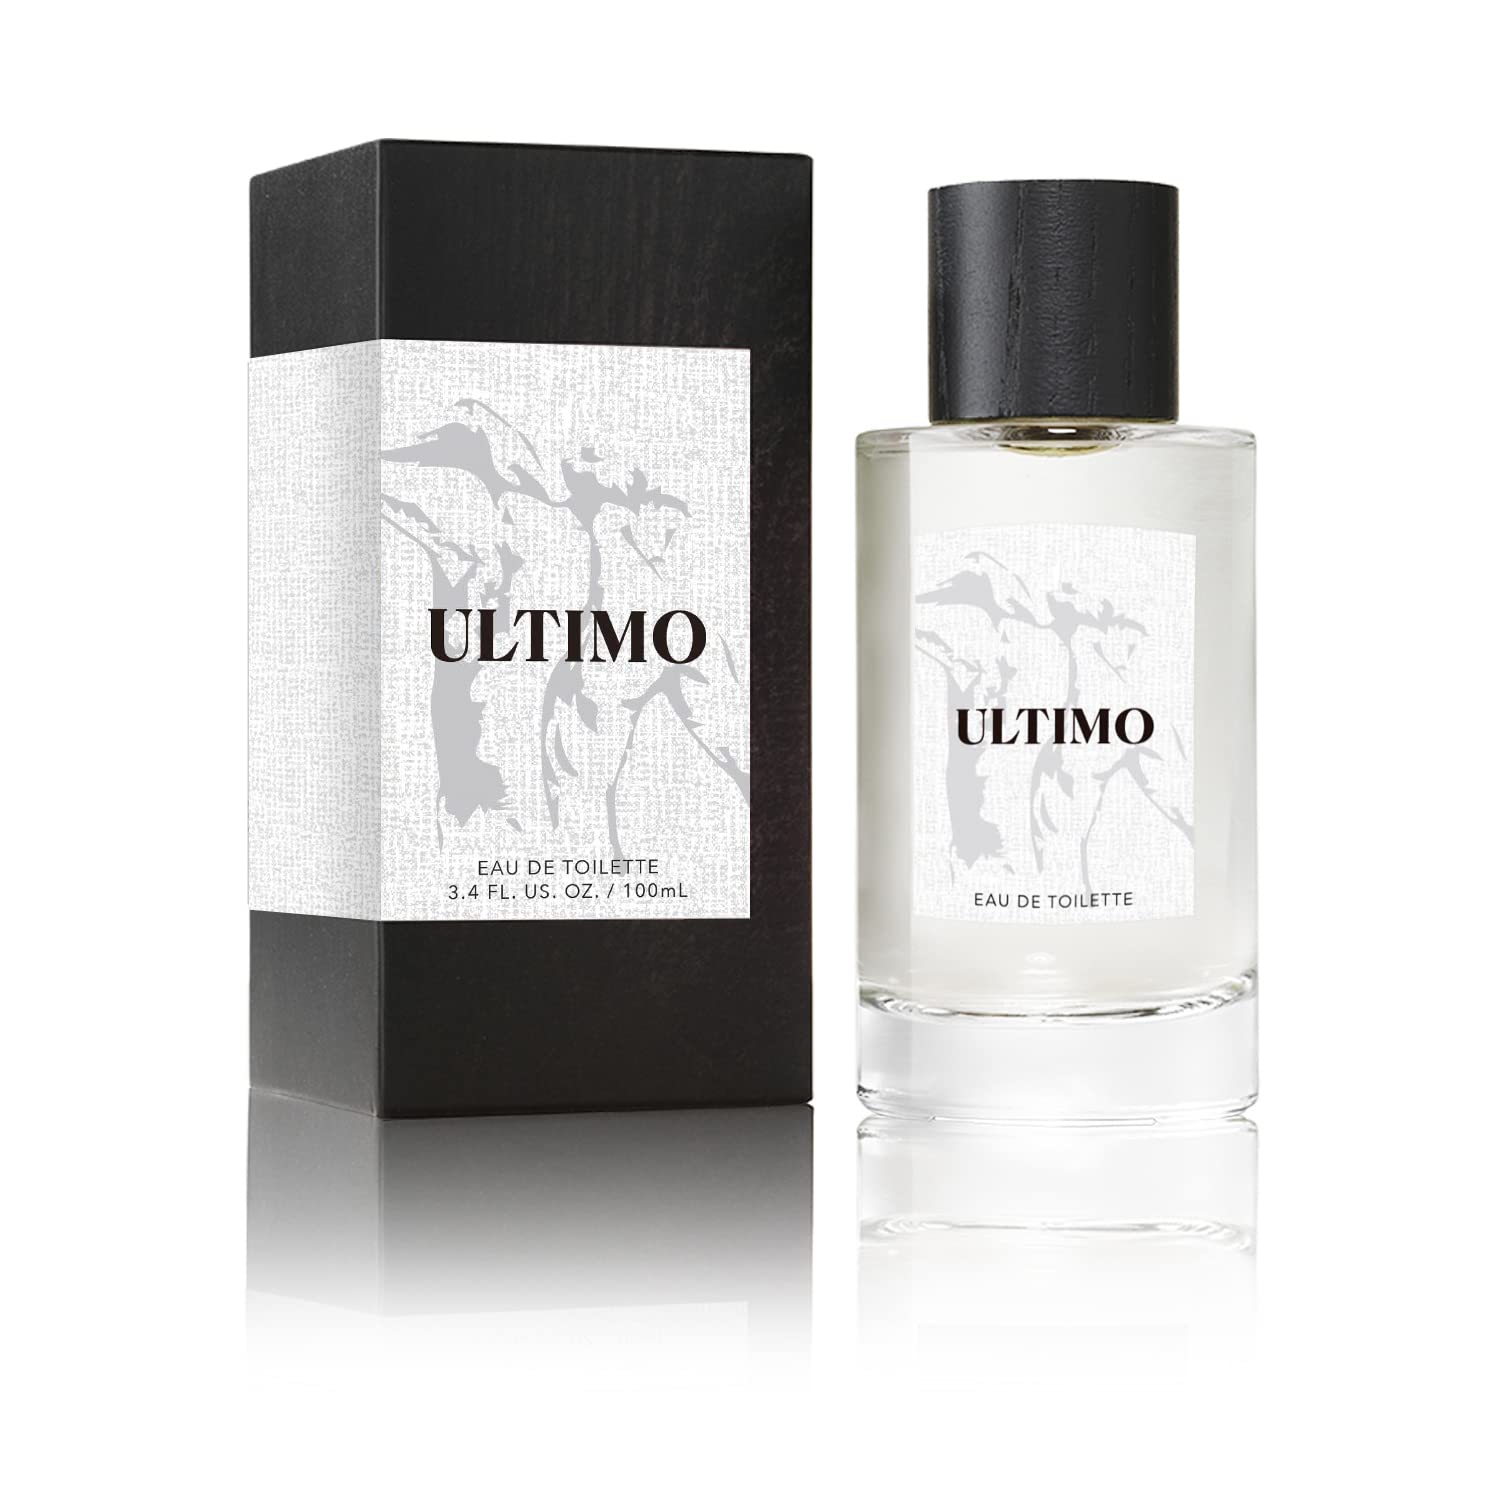 Ultimo Eau de Toilette for Men by Tru Fragrance & Beauty - Spicy and Masculine Cologne - Dynamic and Authentic Fragrance Spray - Same Iconic Scent in a Sleak, Redesigned Bottle and Box - 3.4 fl oz | 100 ml